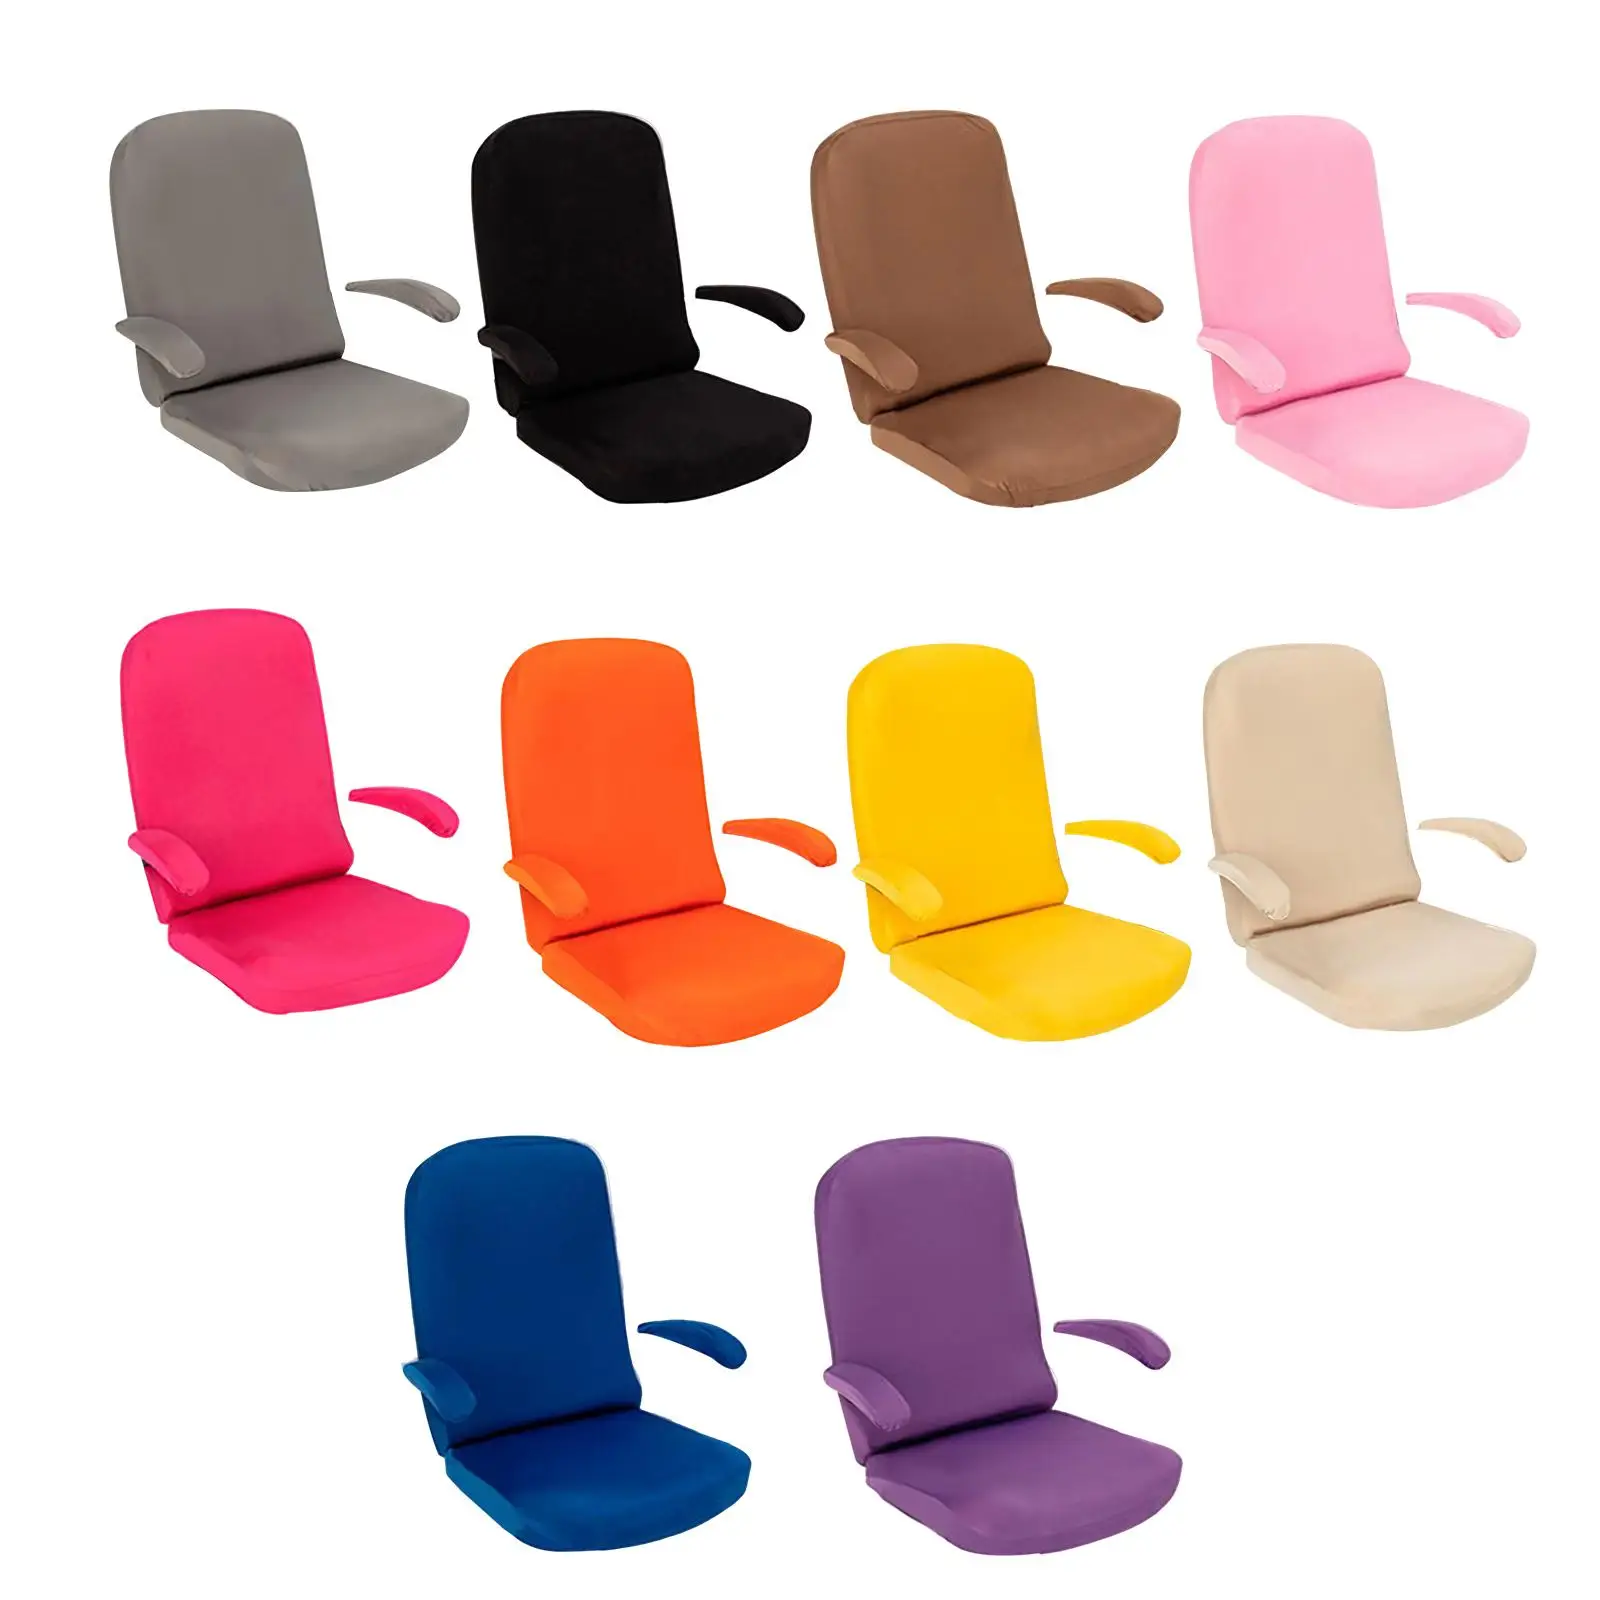 Stretchy Computer Chair Cover Furniture Protector Dustproof Slipcover soft Washable Rotating Chair Cover for Desk Chair